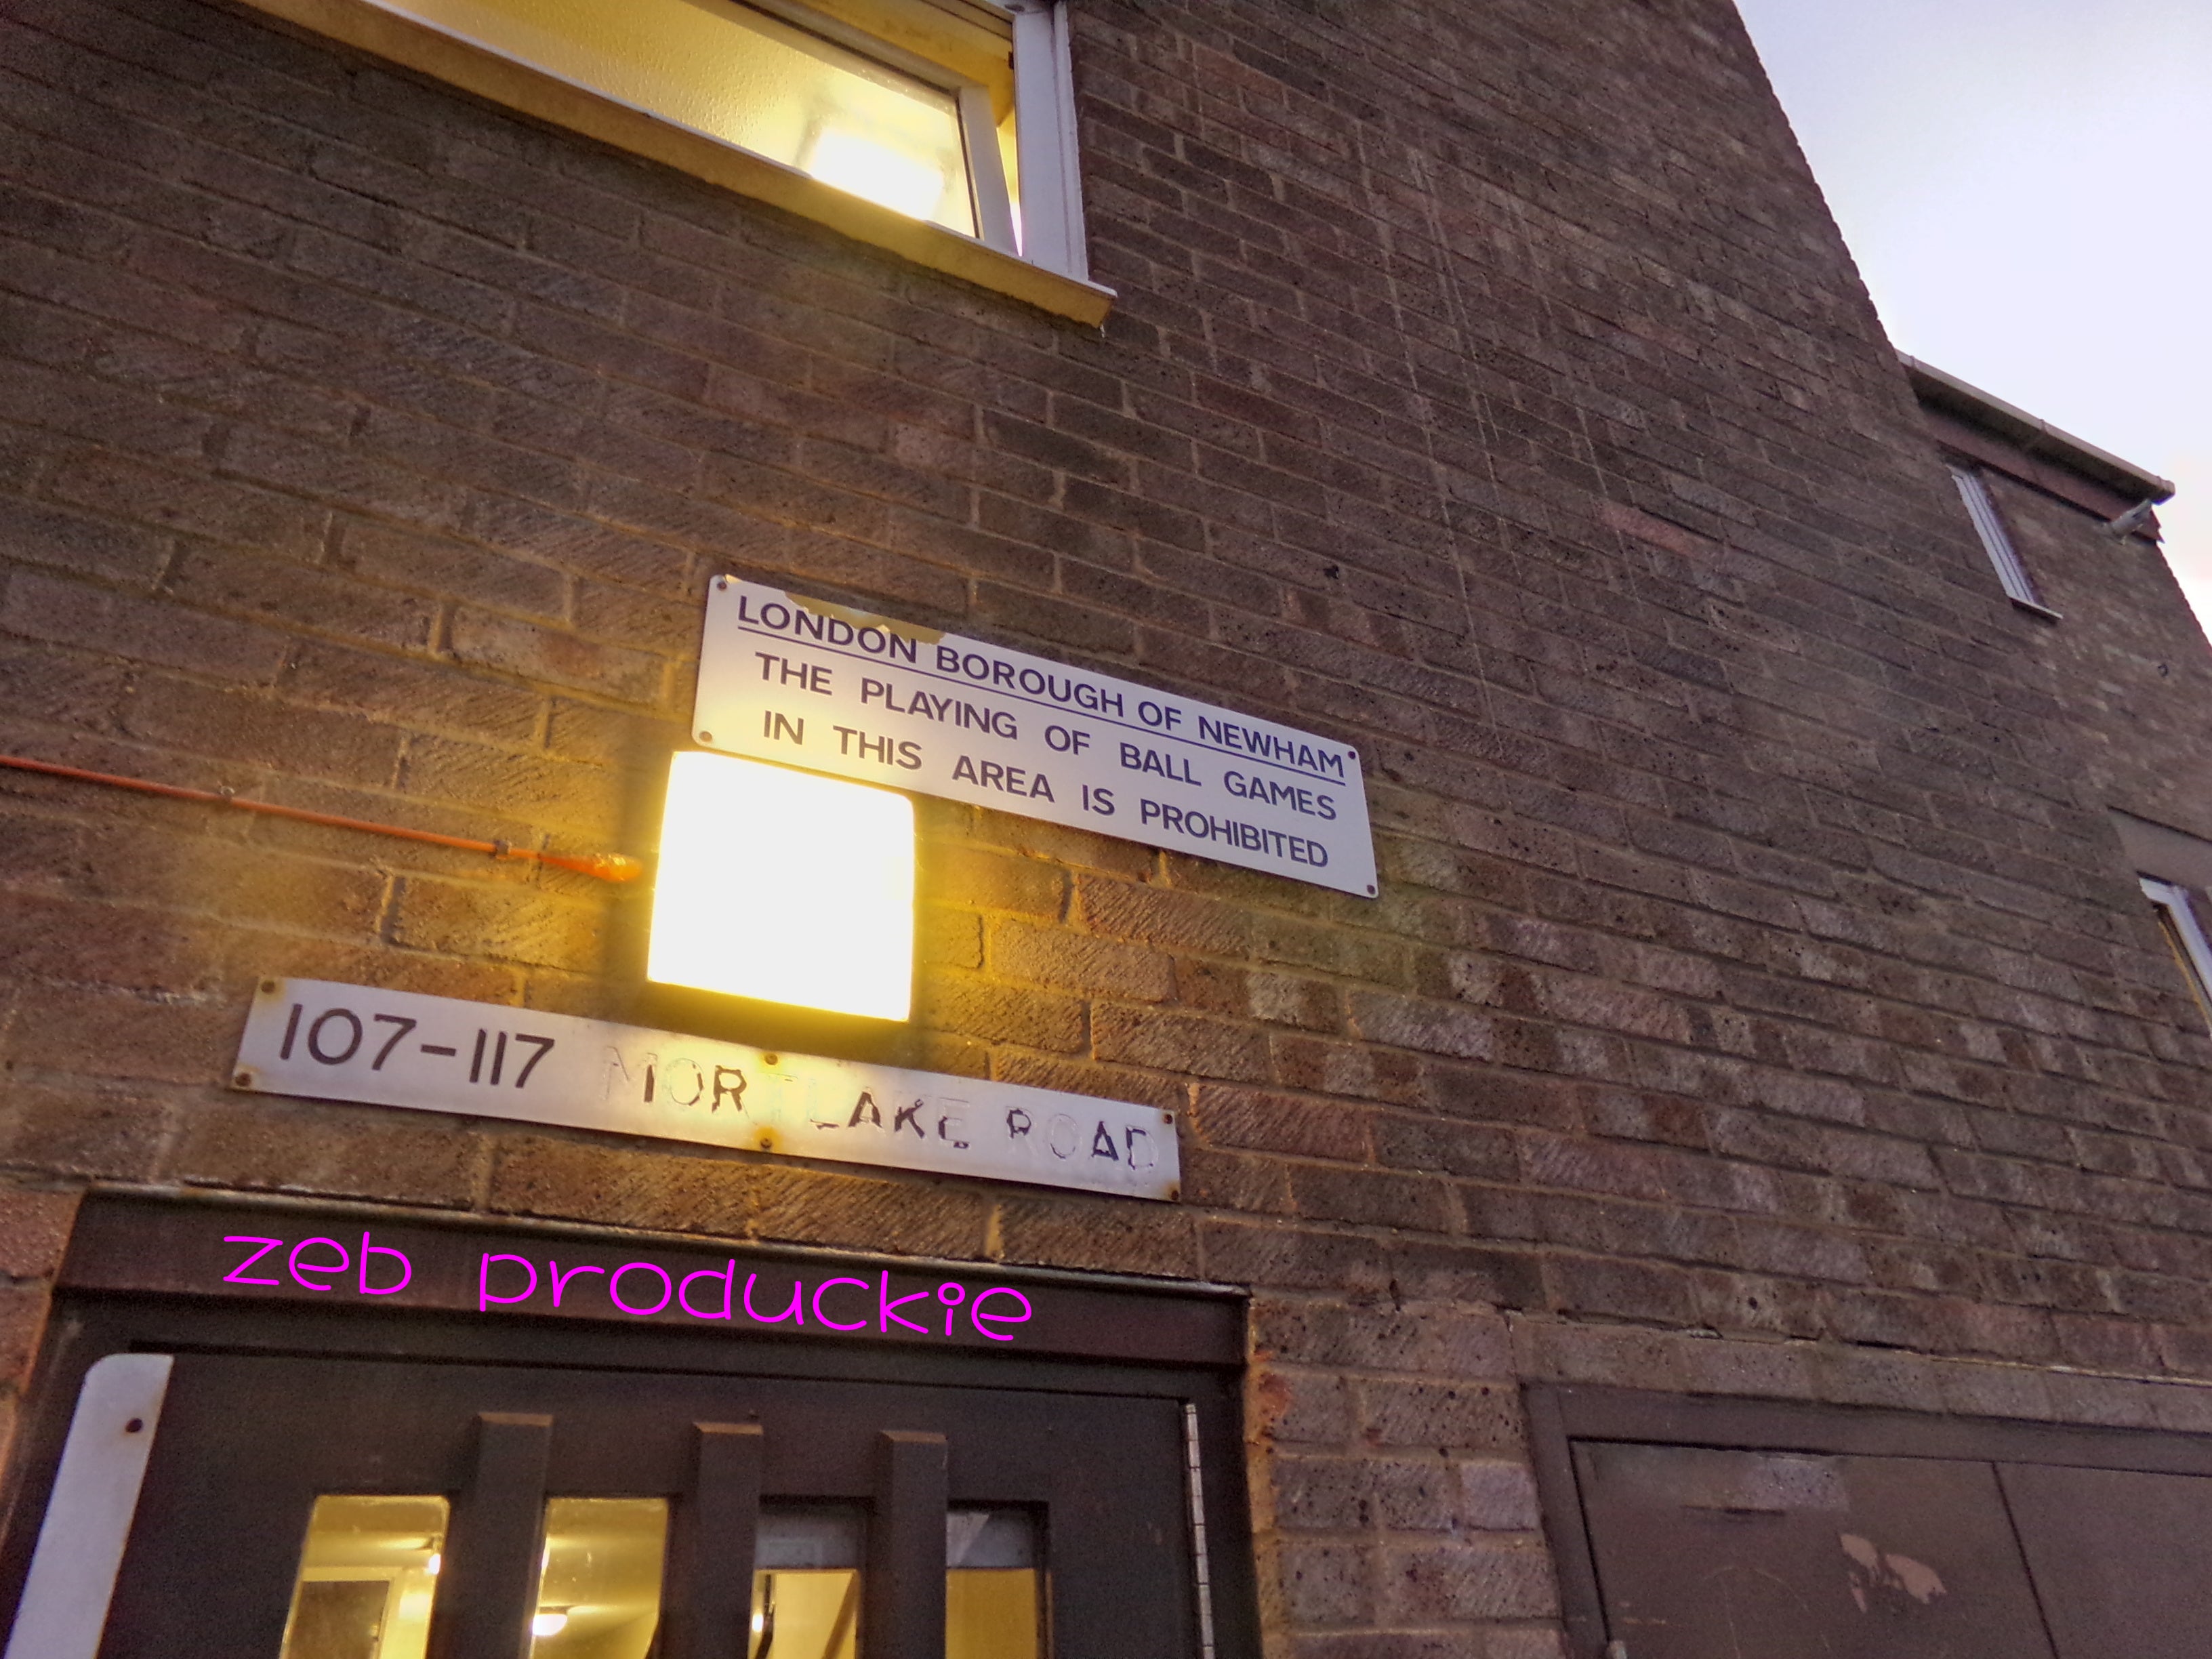 It is a close up of a brown building. On the corner left, a maroon door is shown, above is silver metal sign with the numbers and words faded. There is a square fluorescent light directly above. To the right of the light there is a silver metal sign that reads "The London Borough of Newham - The playing of ball games in this area is prohibited." A corner of a window with yellow light is shown an the top left corner of the photo